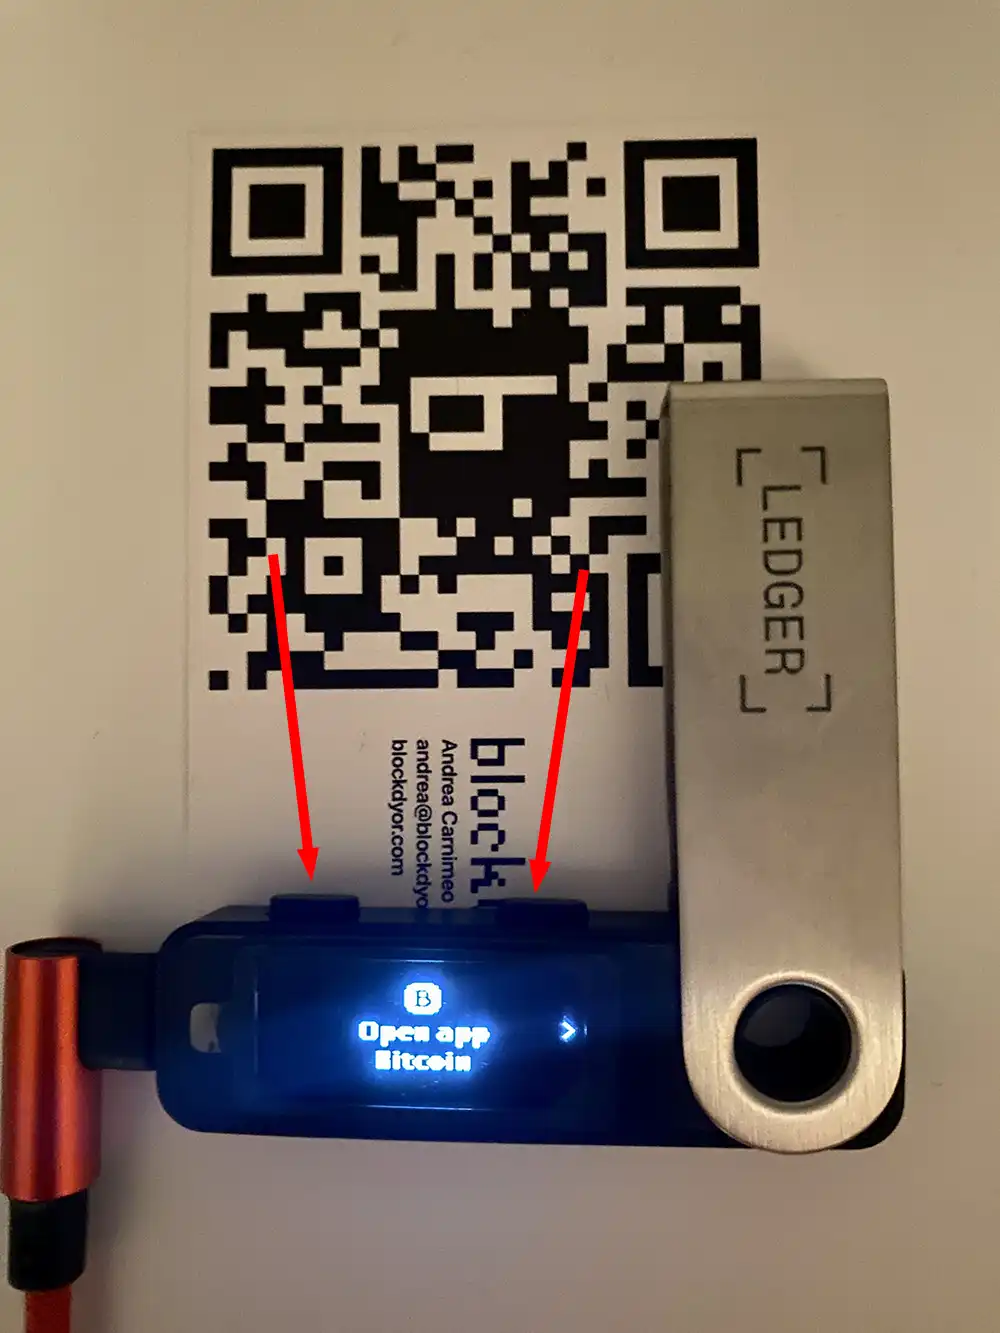 How to Send Receive Funds With The Ledger Nano S Plus Step 4a